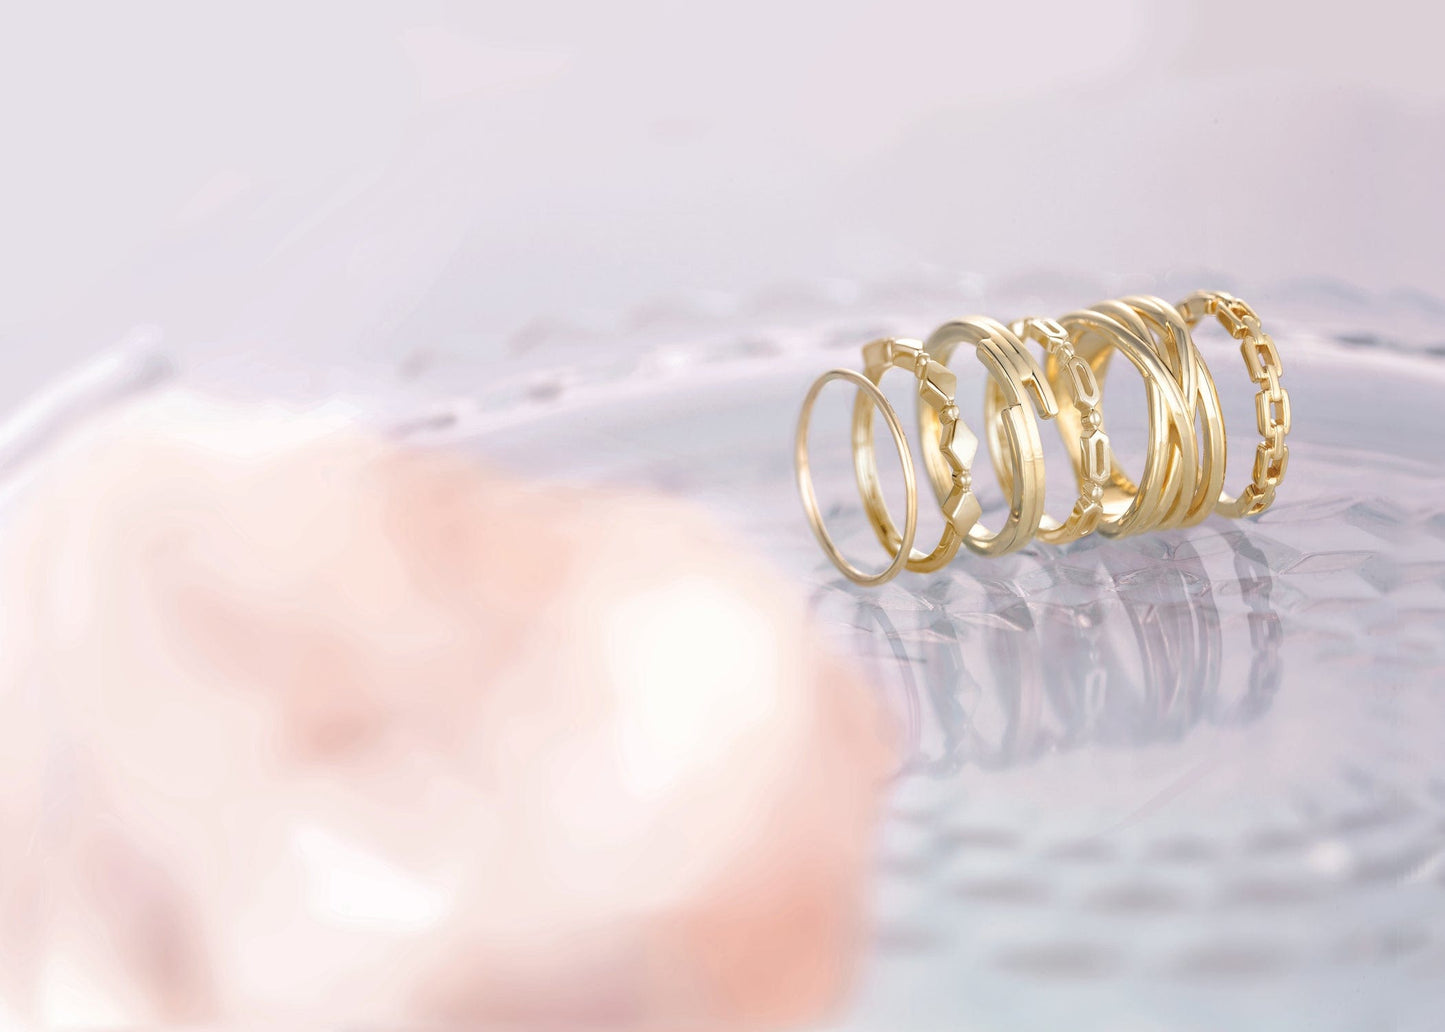 14ct Gold Link Ring - Moments Jewellery